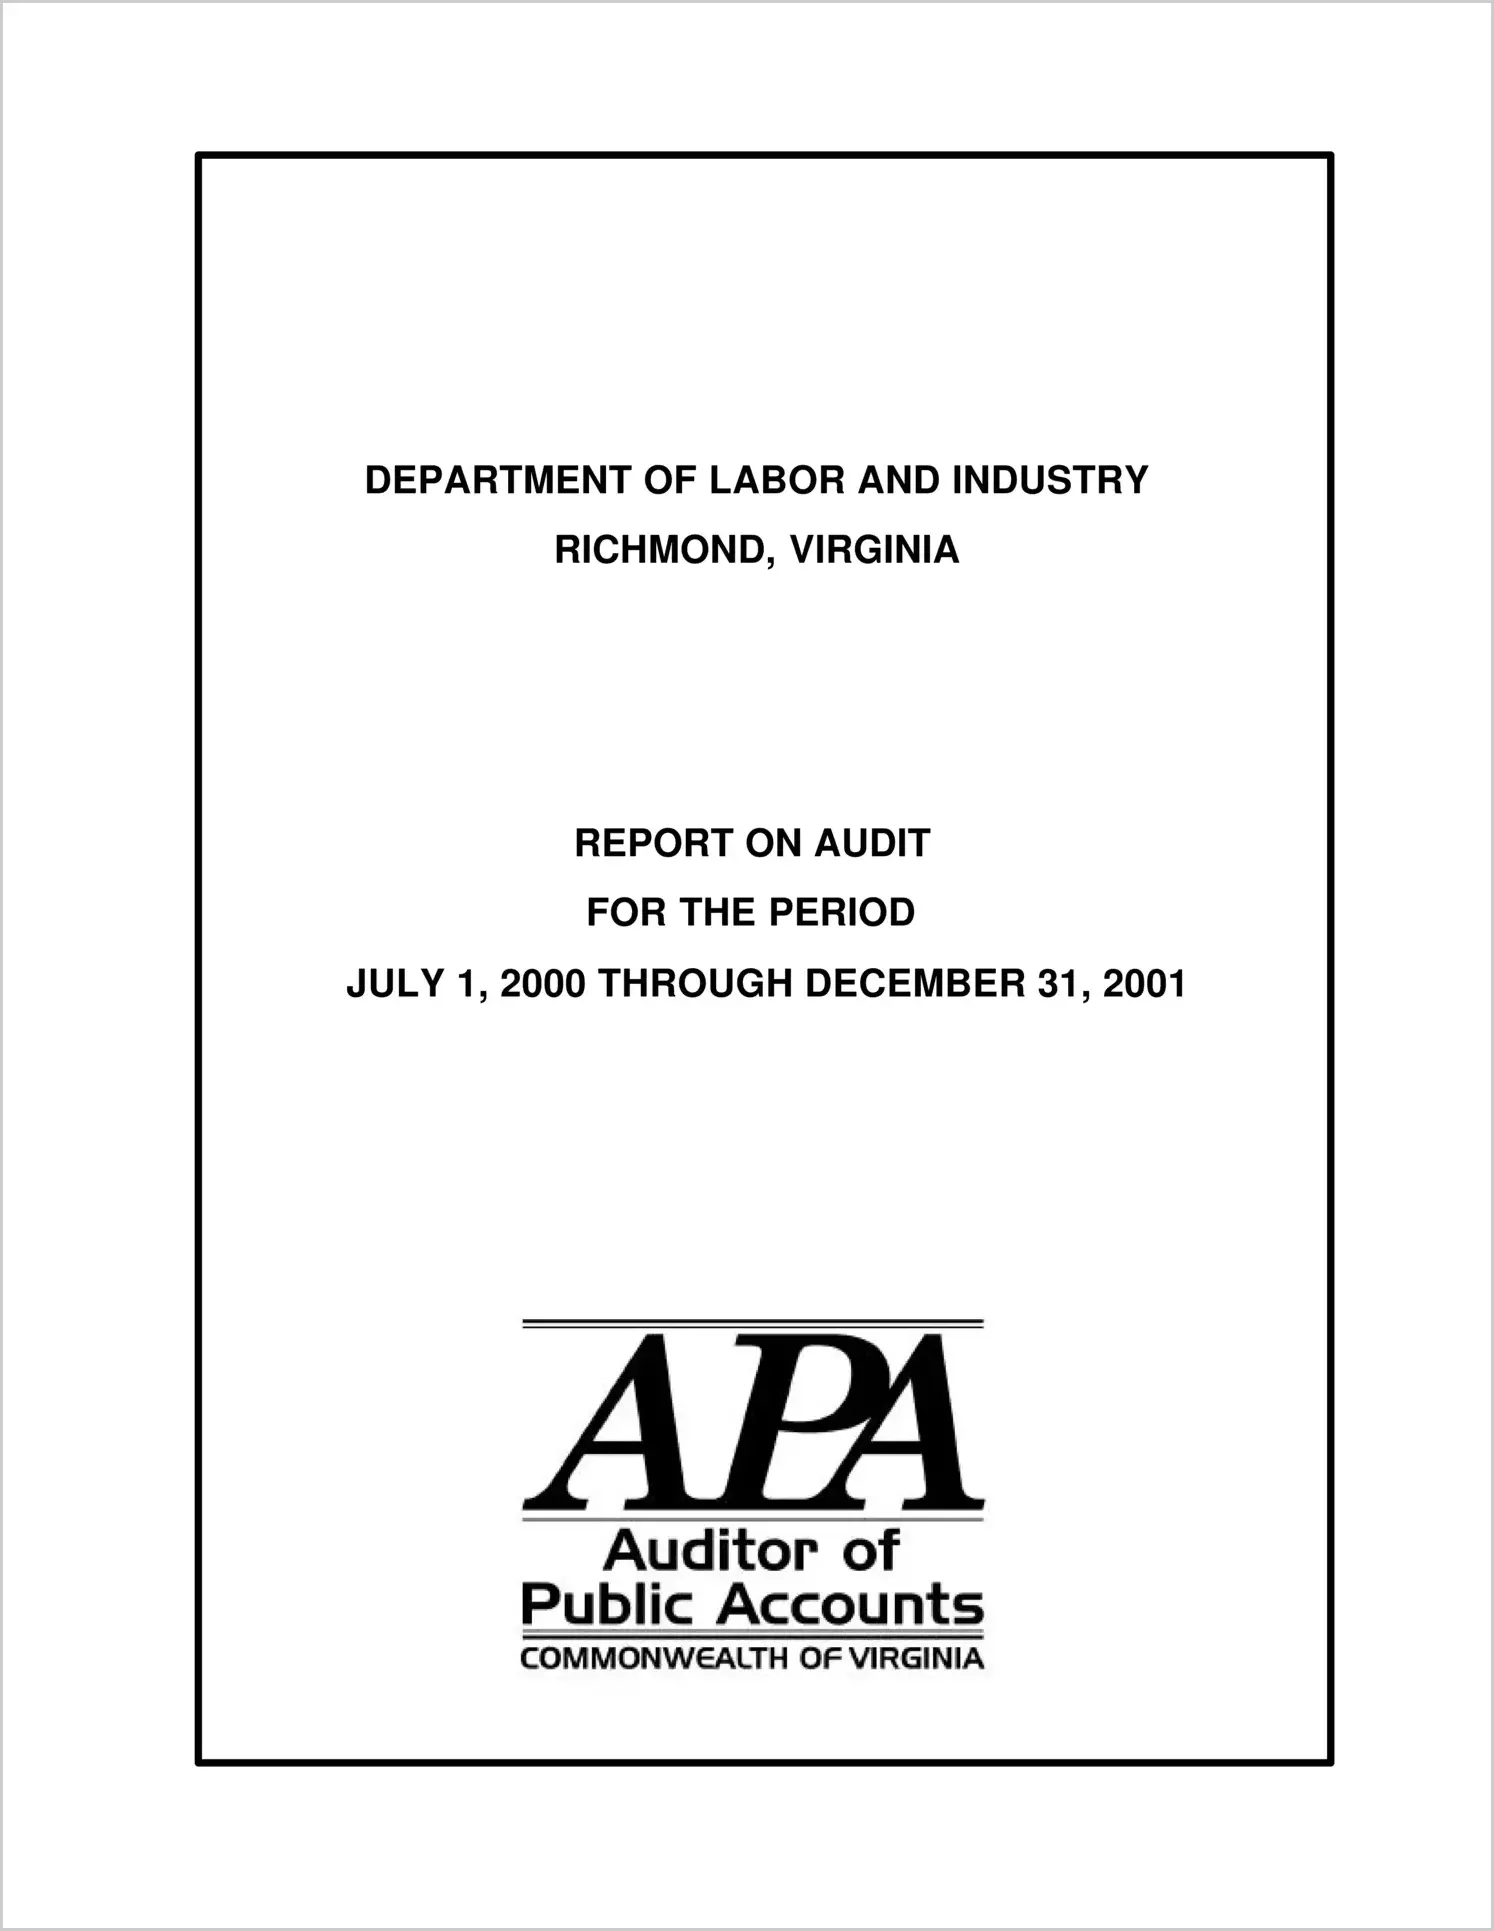 Department of Labor and Industry for the period ended December 31, 2001